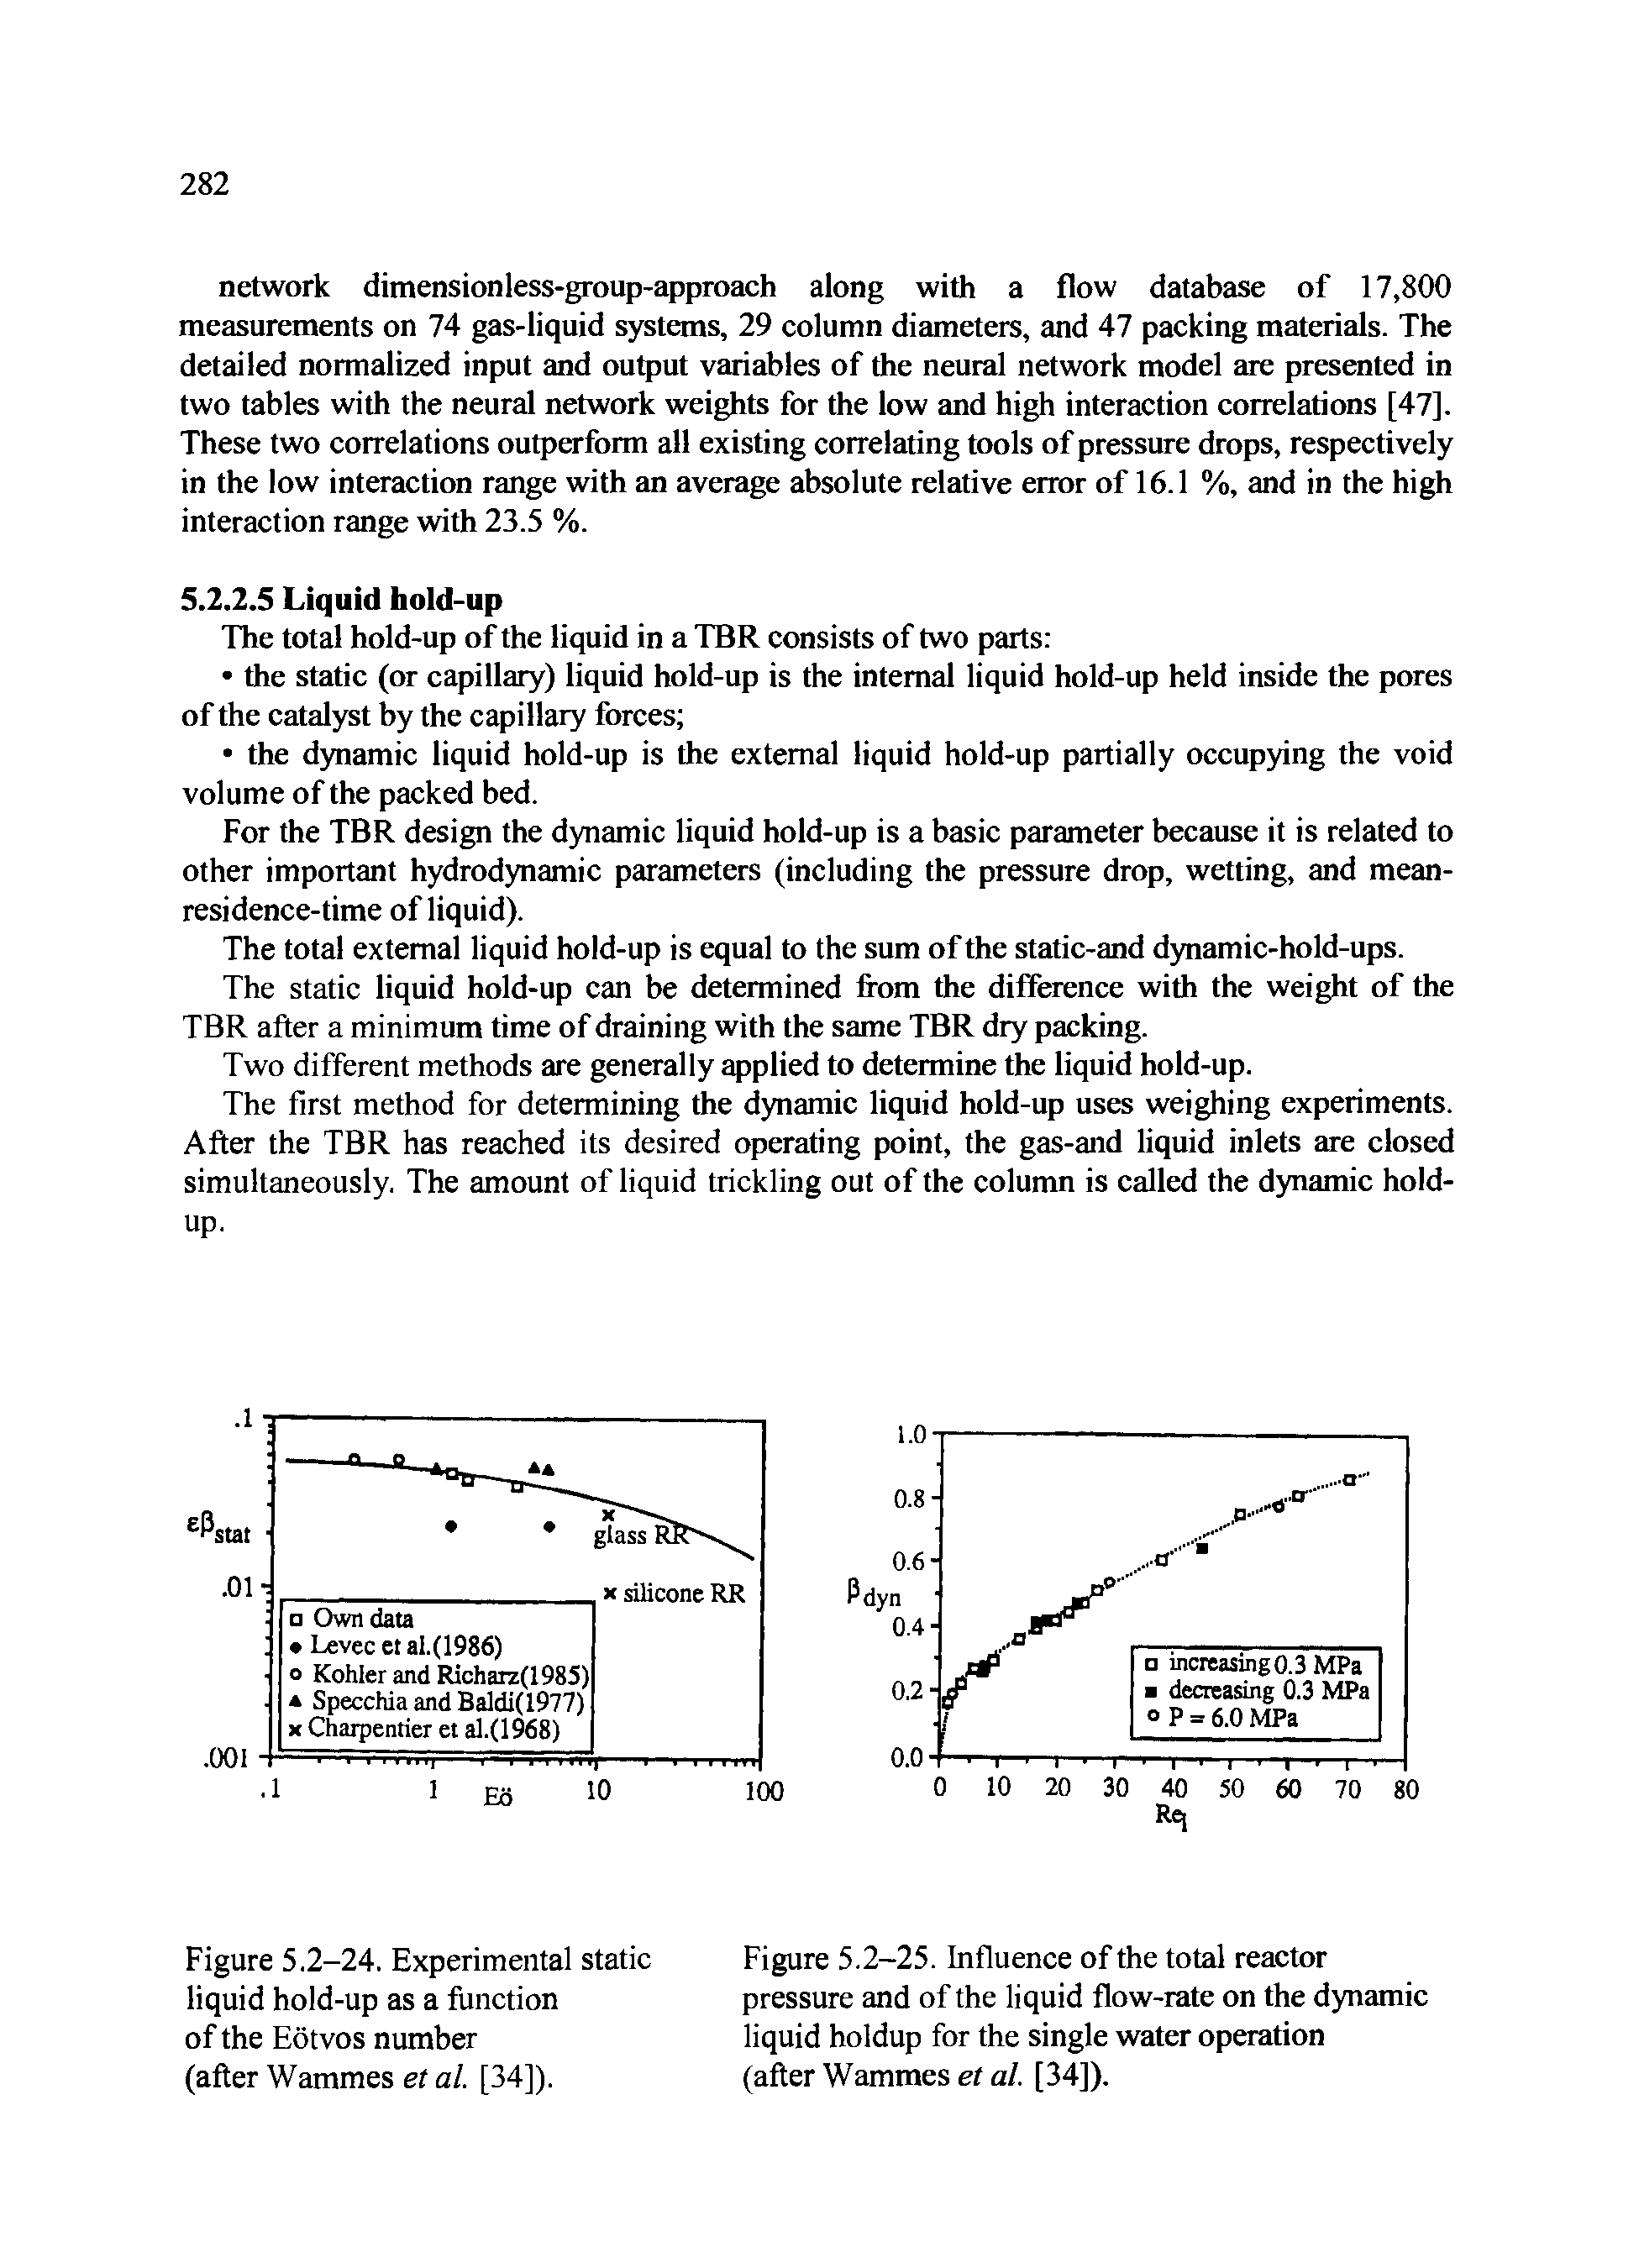 Figure 5.2-25. Influence of the total reactor pressure and of the liquid flow-rate on the dynamic liquid holdup for the single water operation (after Wammes et al. [34]).